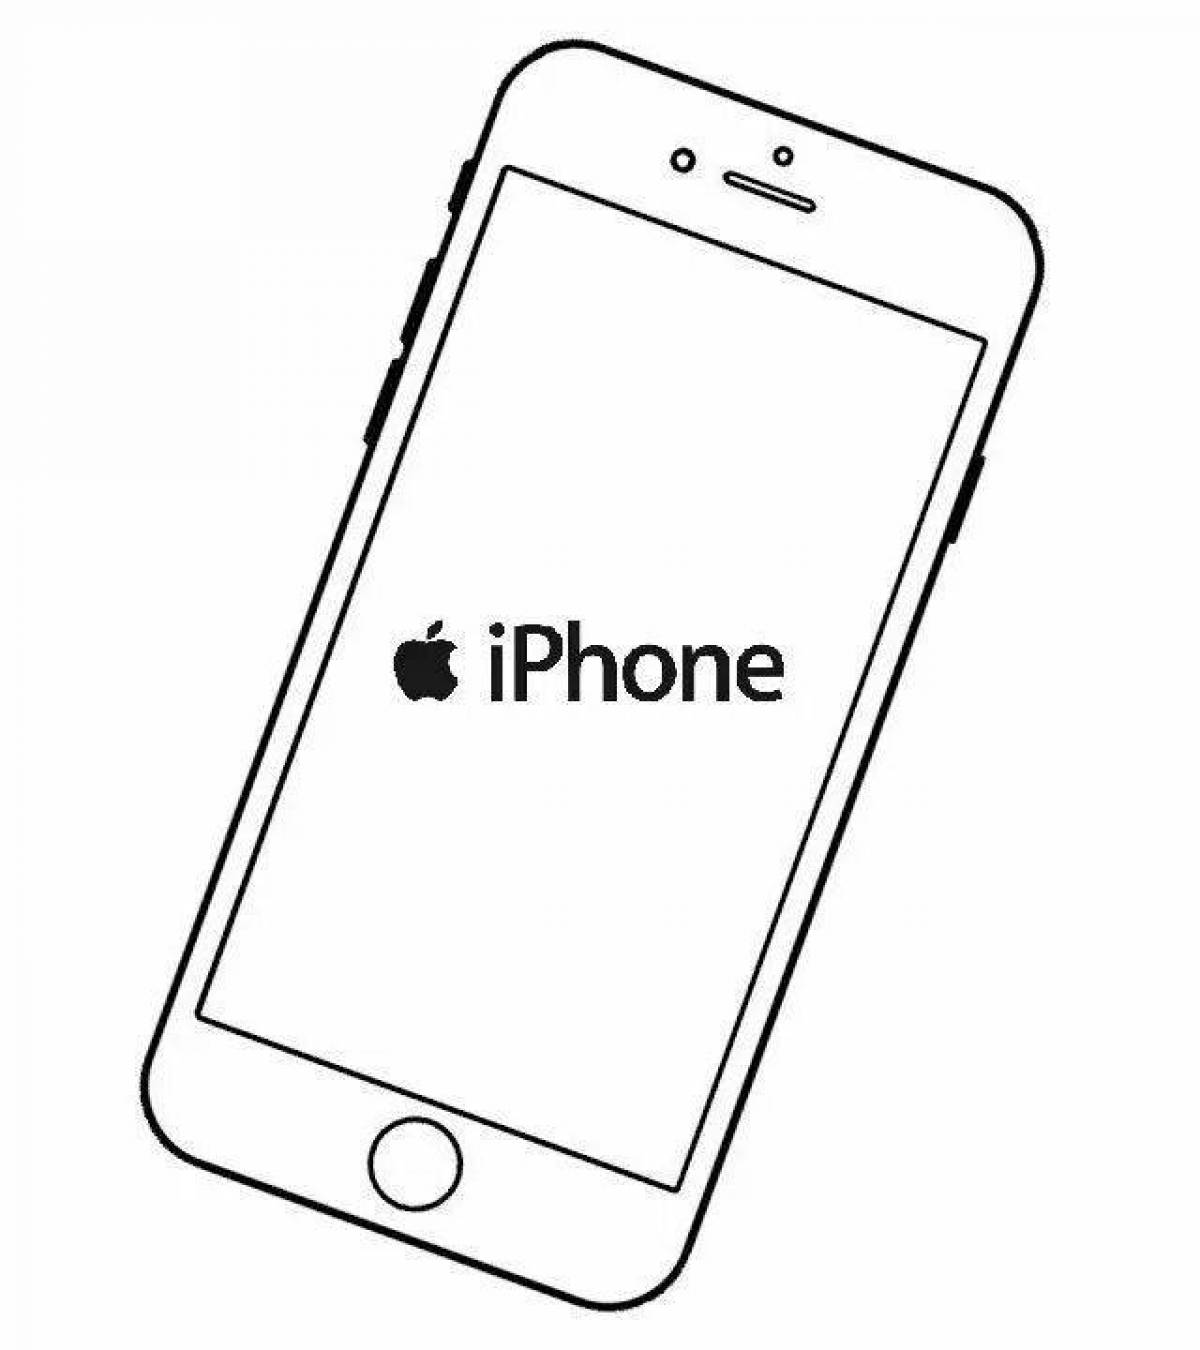 Colorful iphone coloring page for everyone